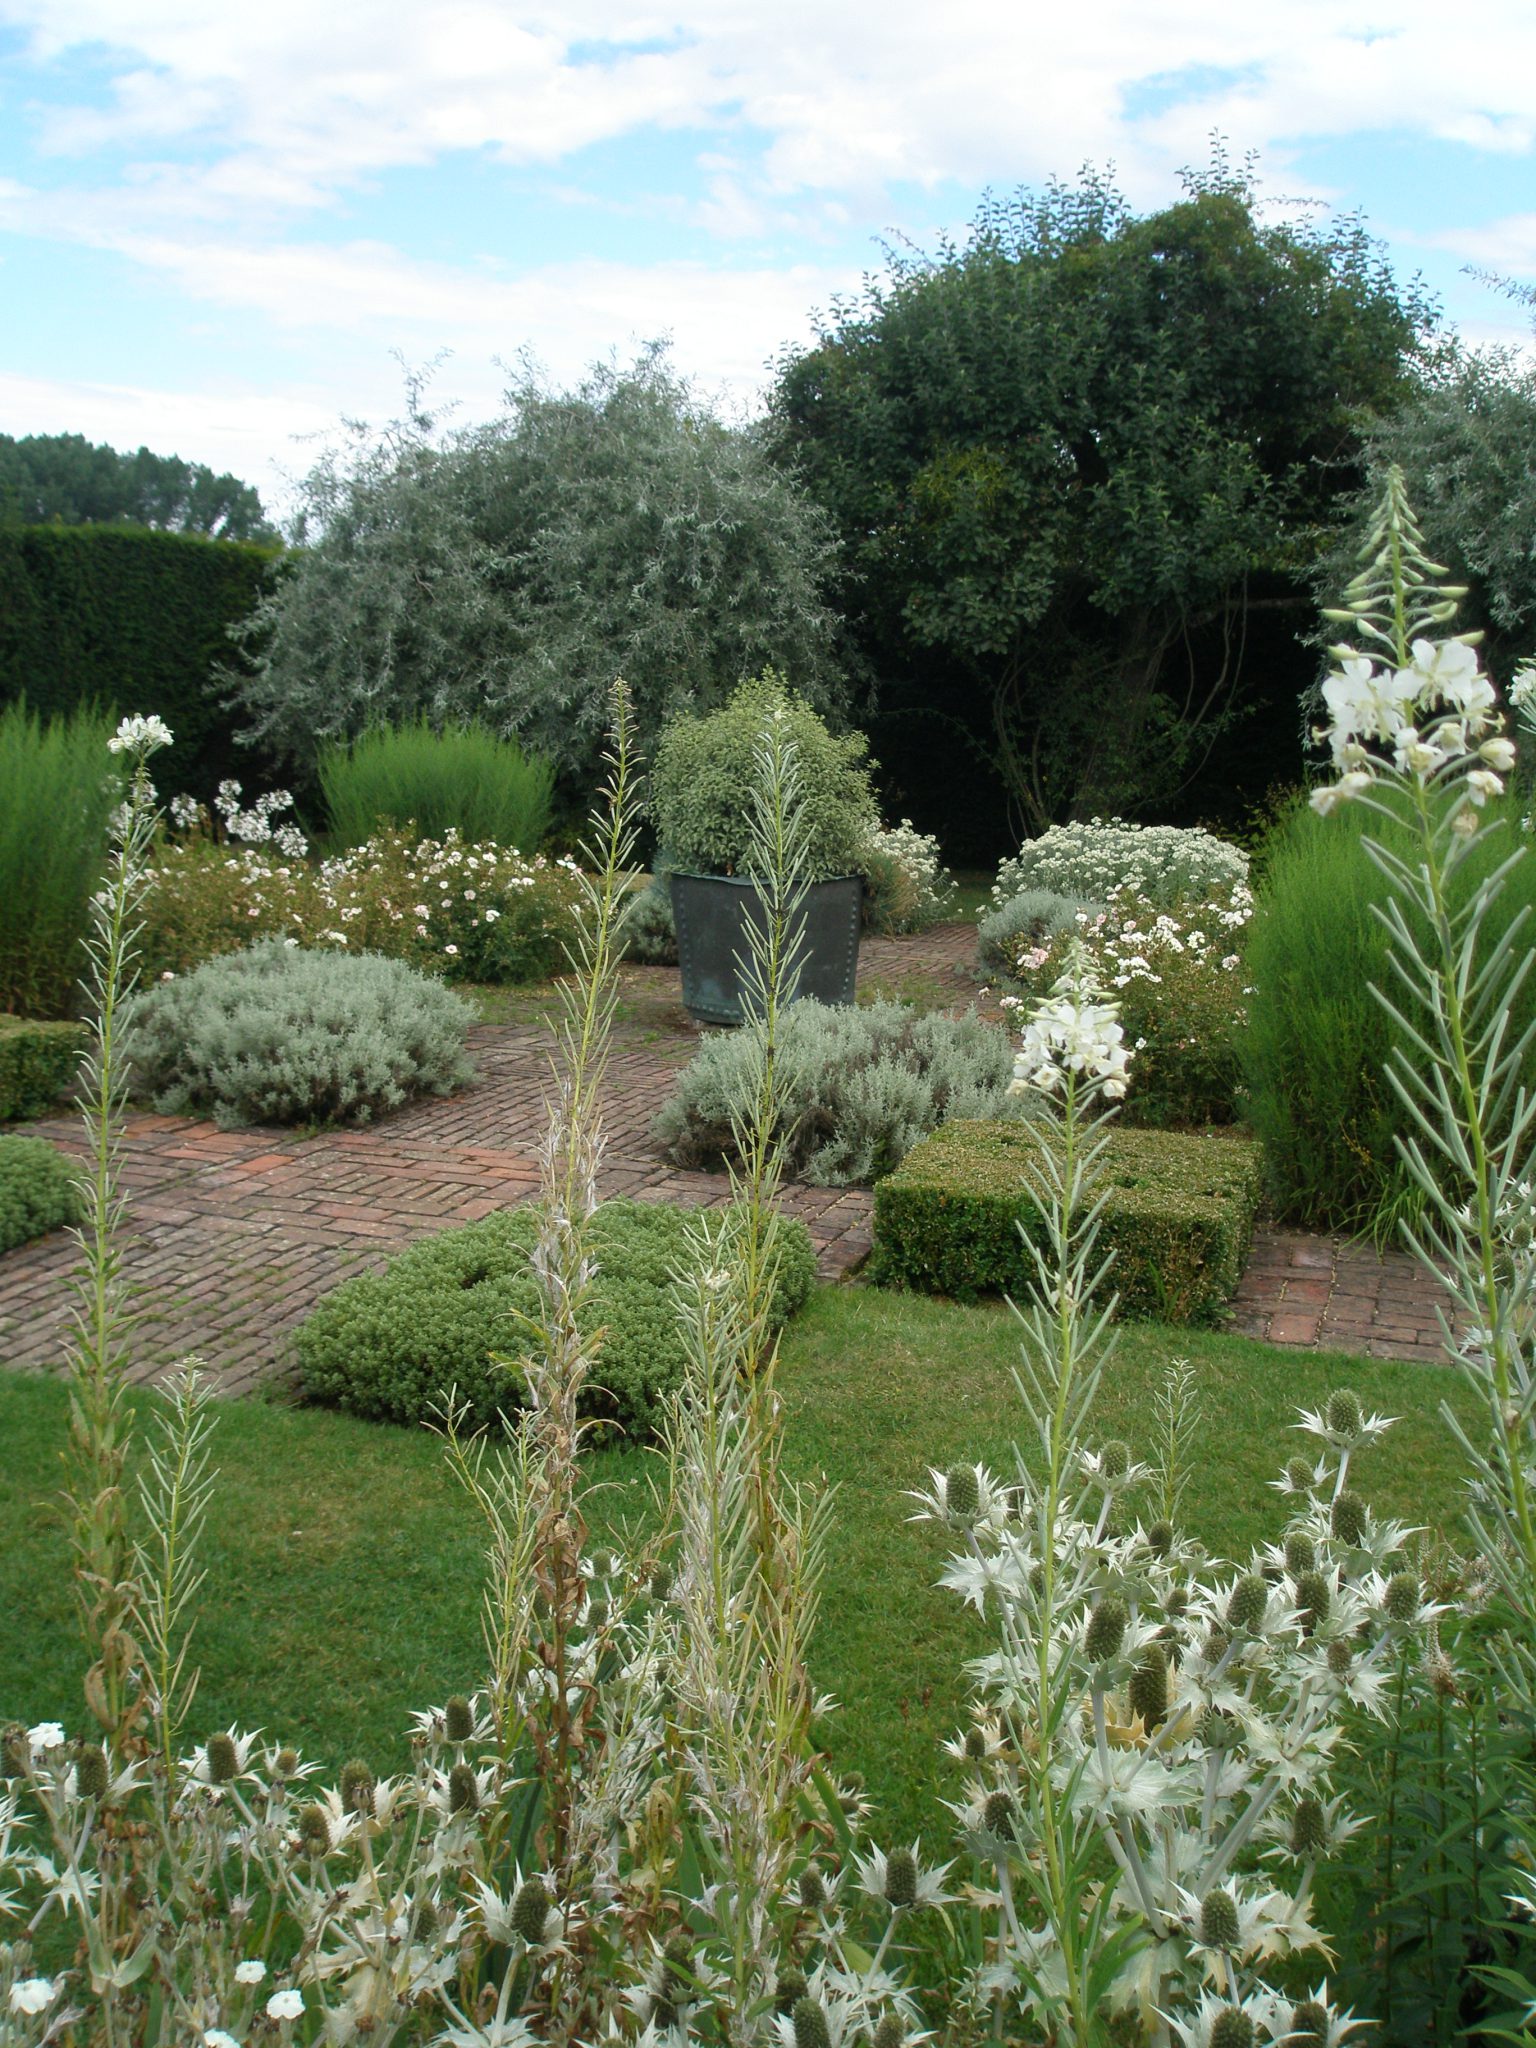 The Grey & White Garden's elegant geometry is softened by billowing flowers and foliage.